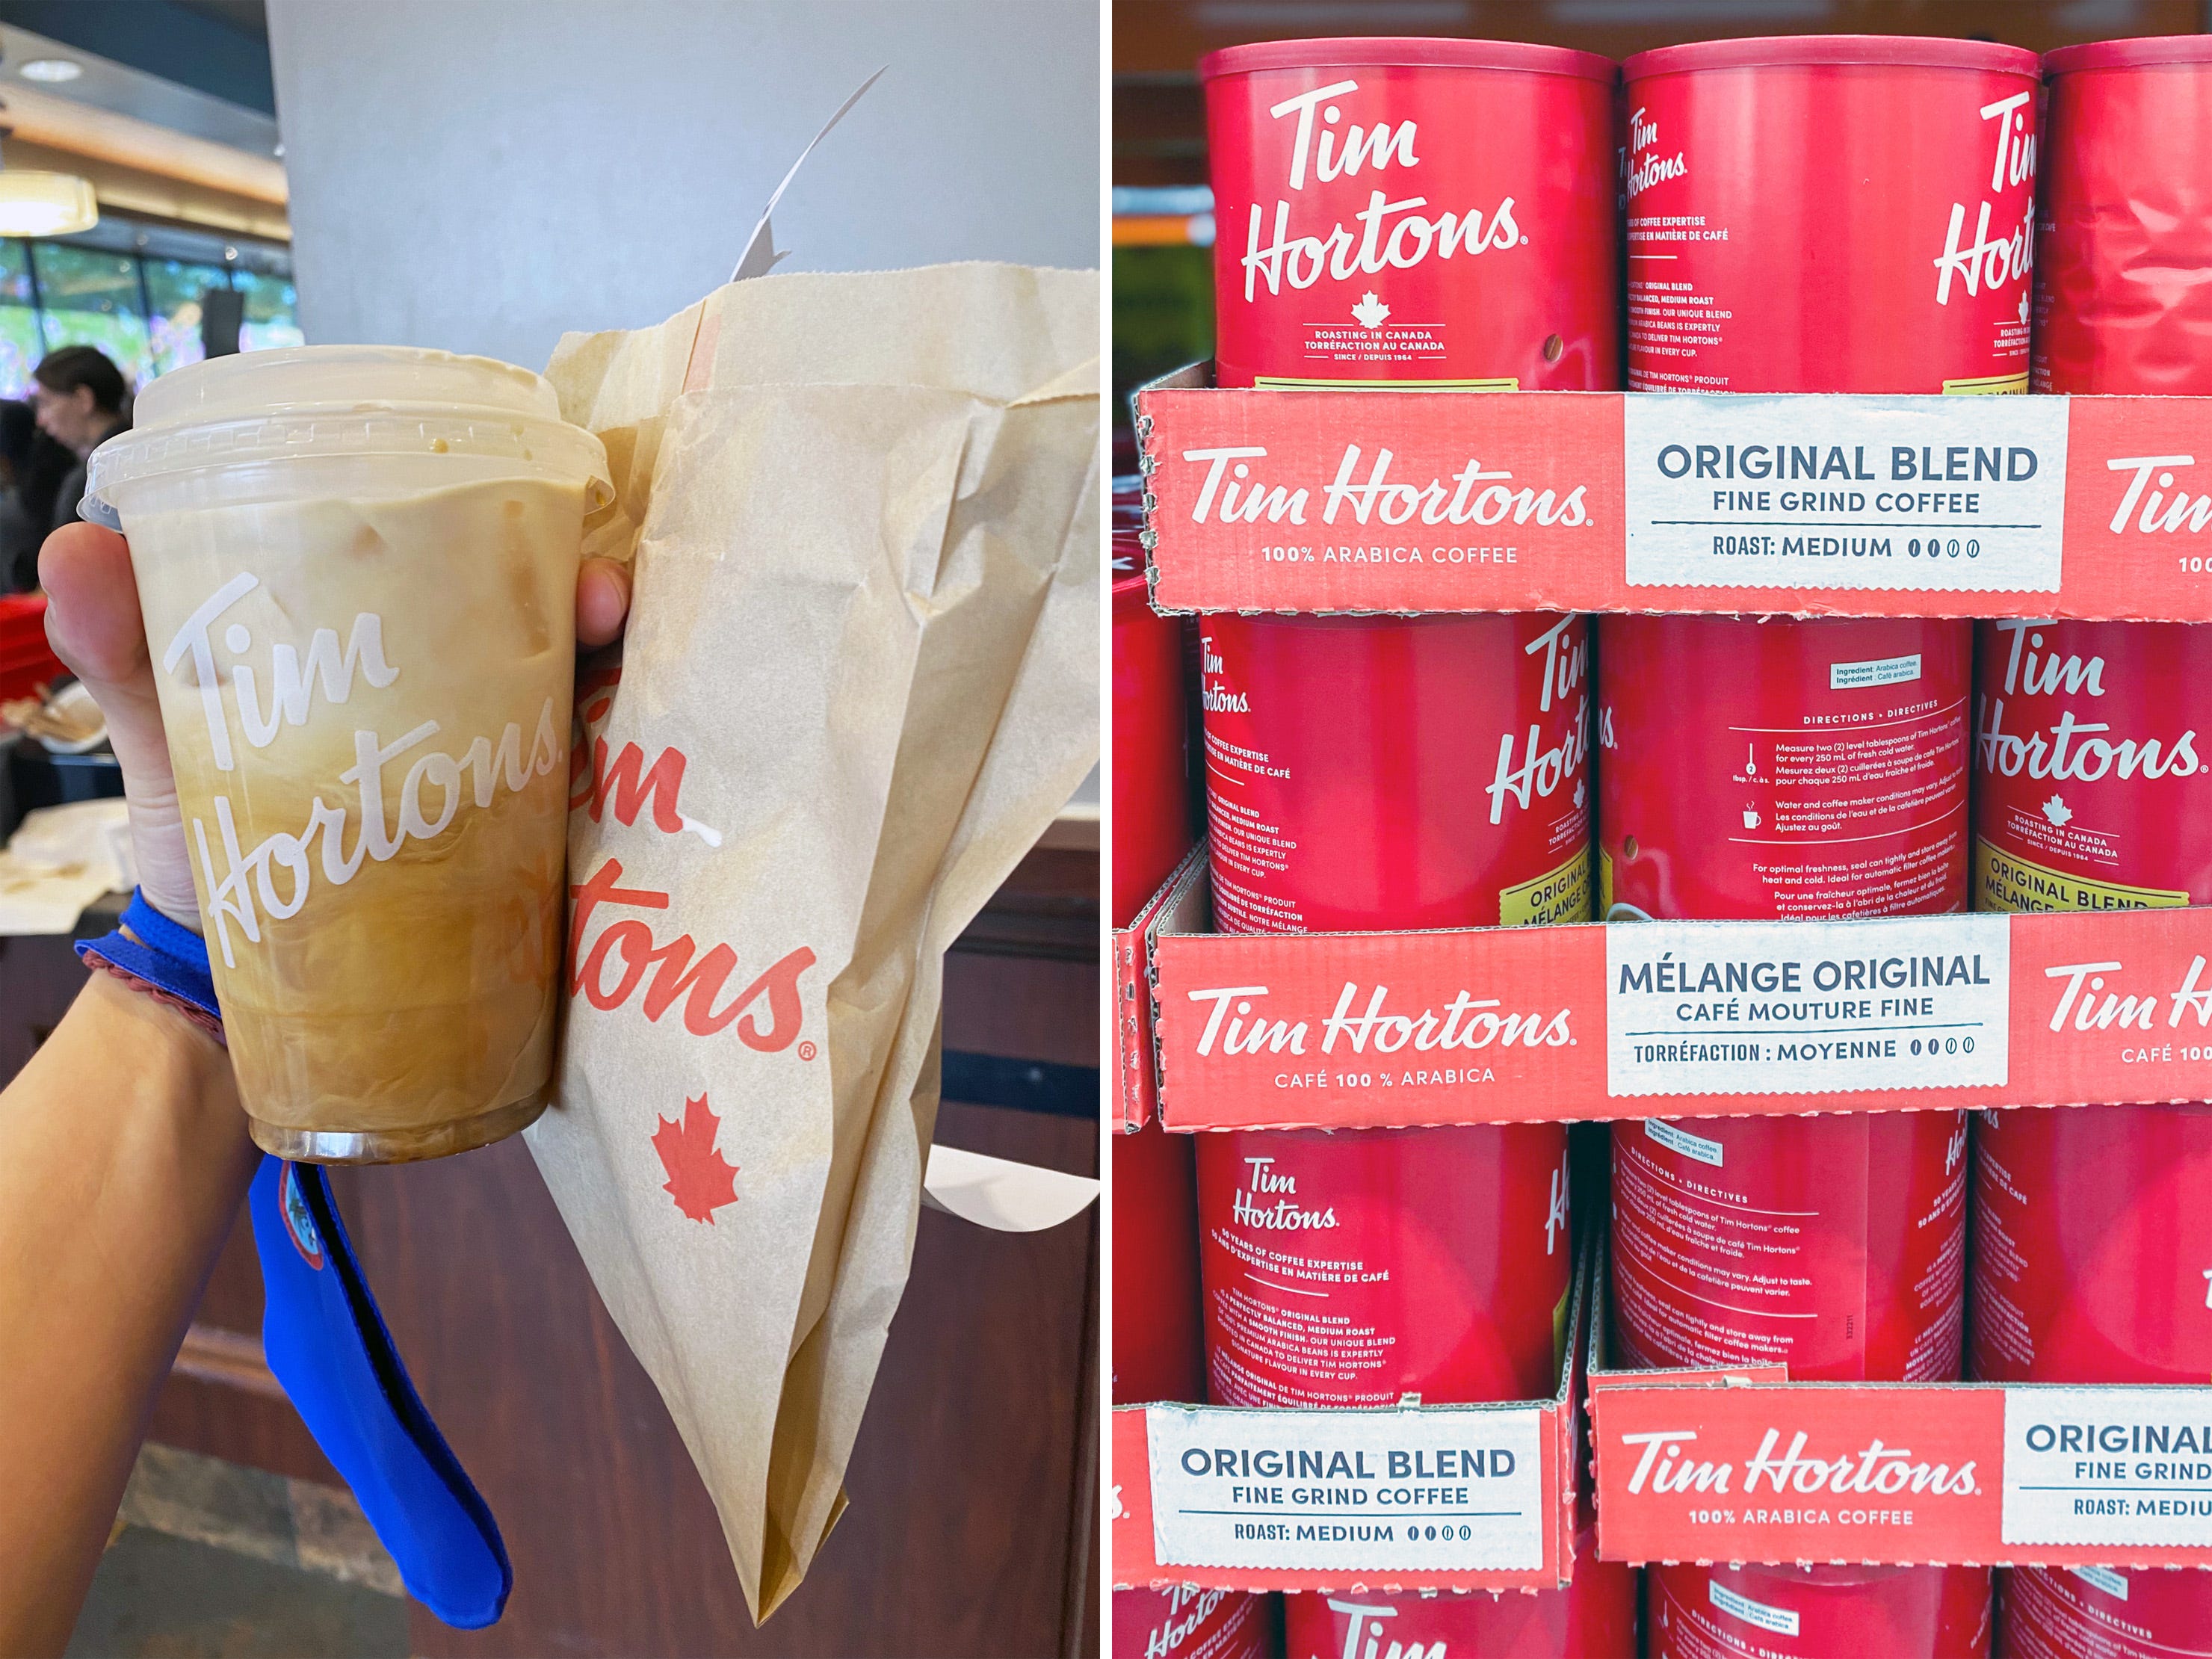 <p><a href="https://www.insider.com/brit-tries-tim-hortons-for-the-first-time-taste-test-2022-7">Tim Horton's</a> is a popular coffee brand and fast-food breakfast joint based in Canada. </p><p>I got a breakfast sandwich and an iced coffee drink when I visited the chain, and thought the food tasted fresher than that from most fast-food restaurants I've been to.</p>